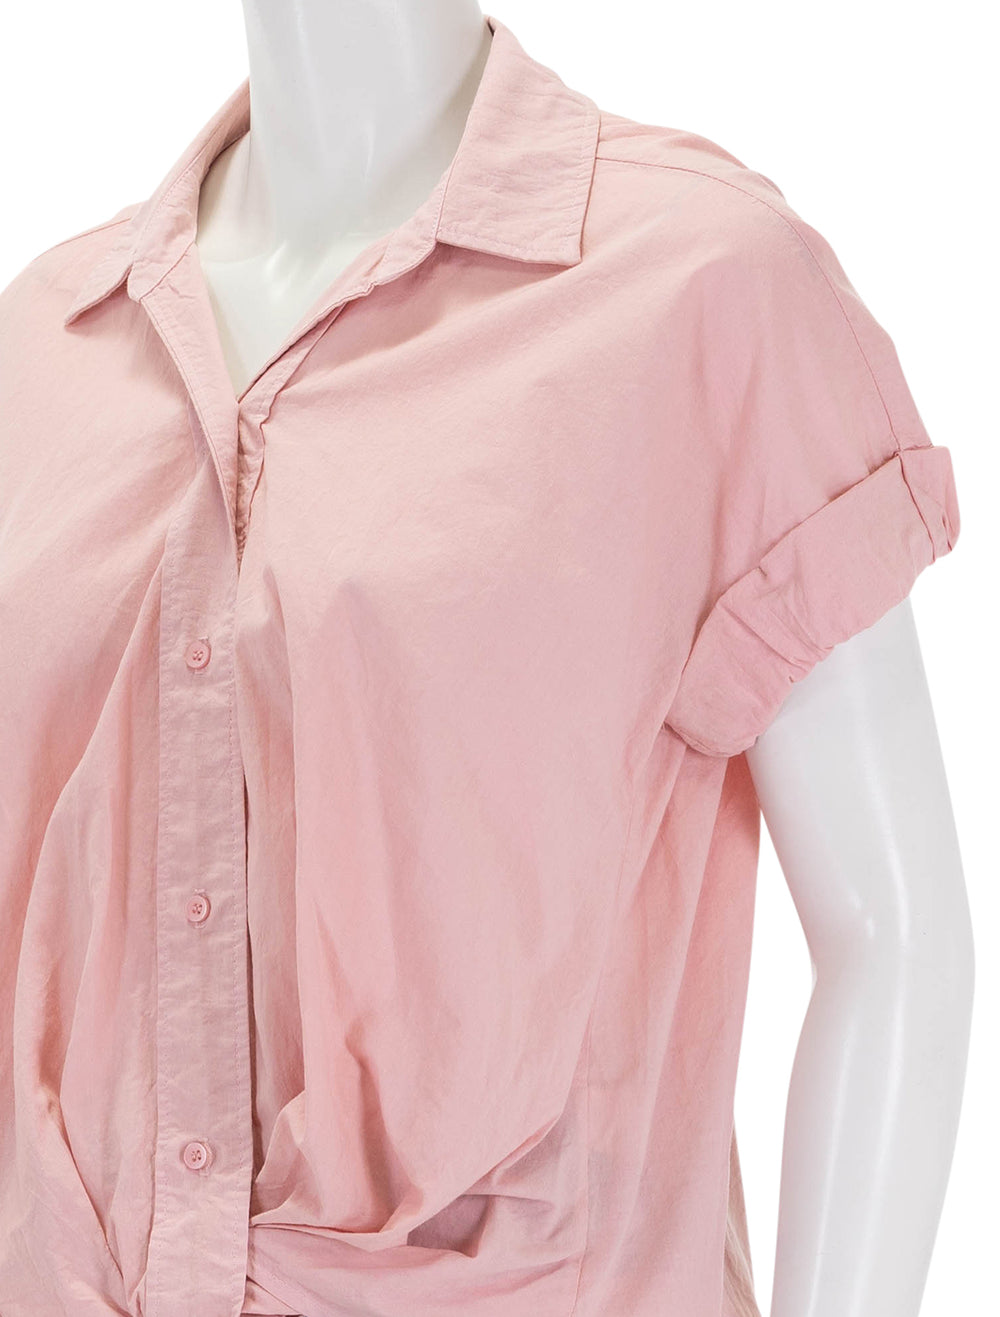 Close-up view of Stateside's voile s/s twist front shirt in lipstick pink.